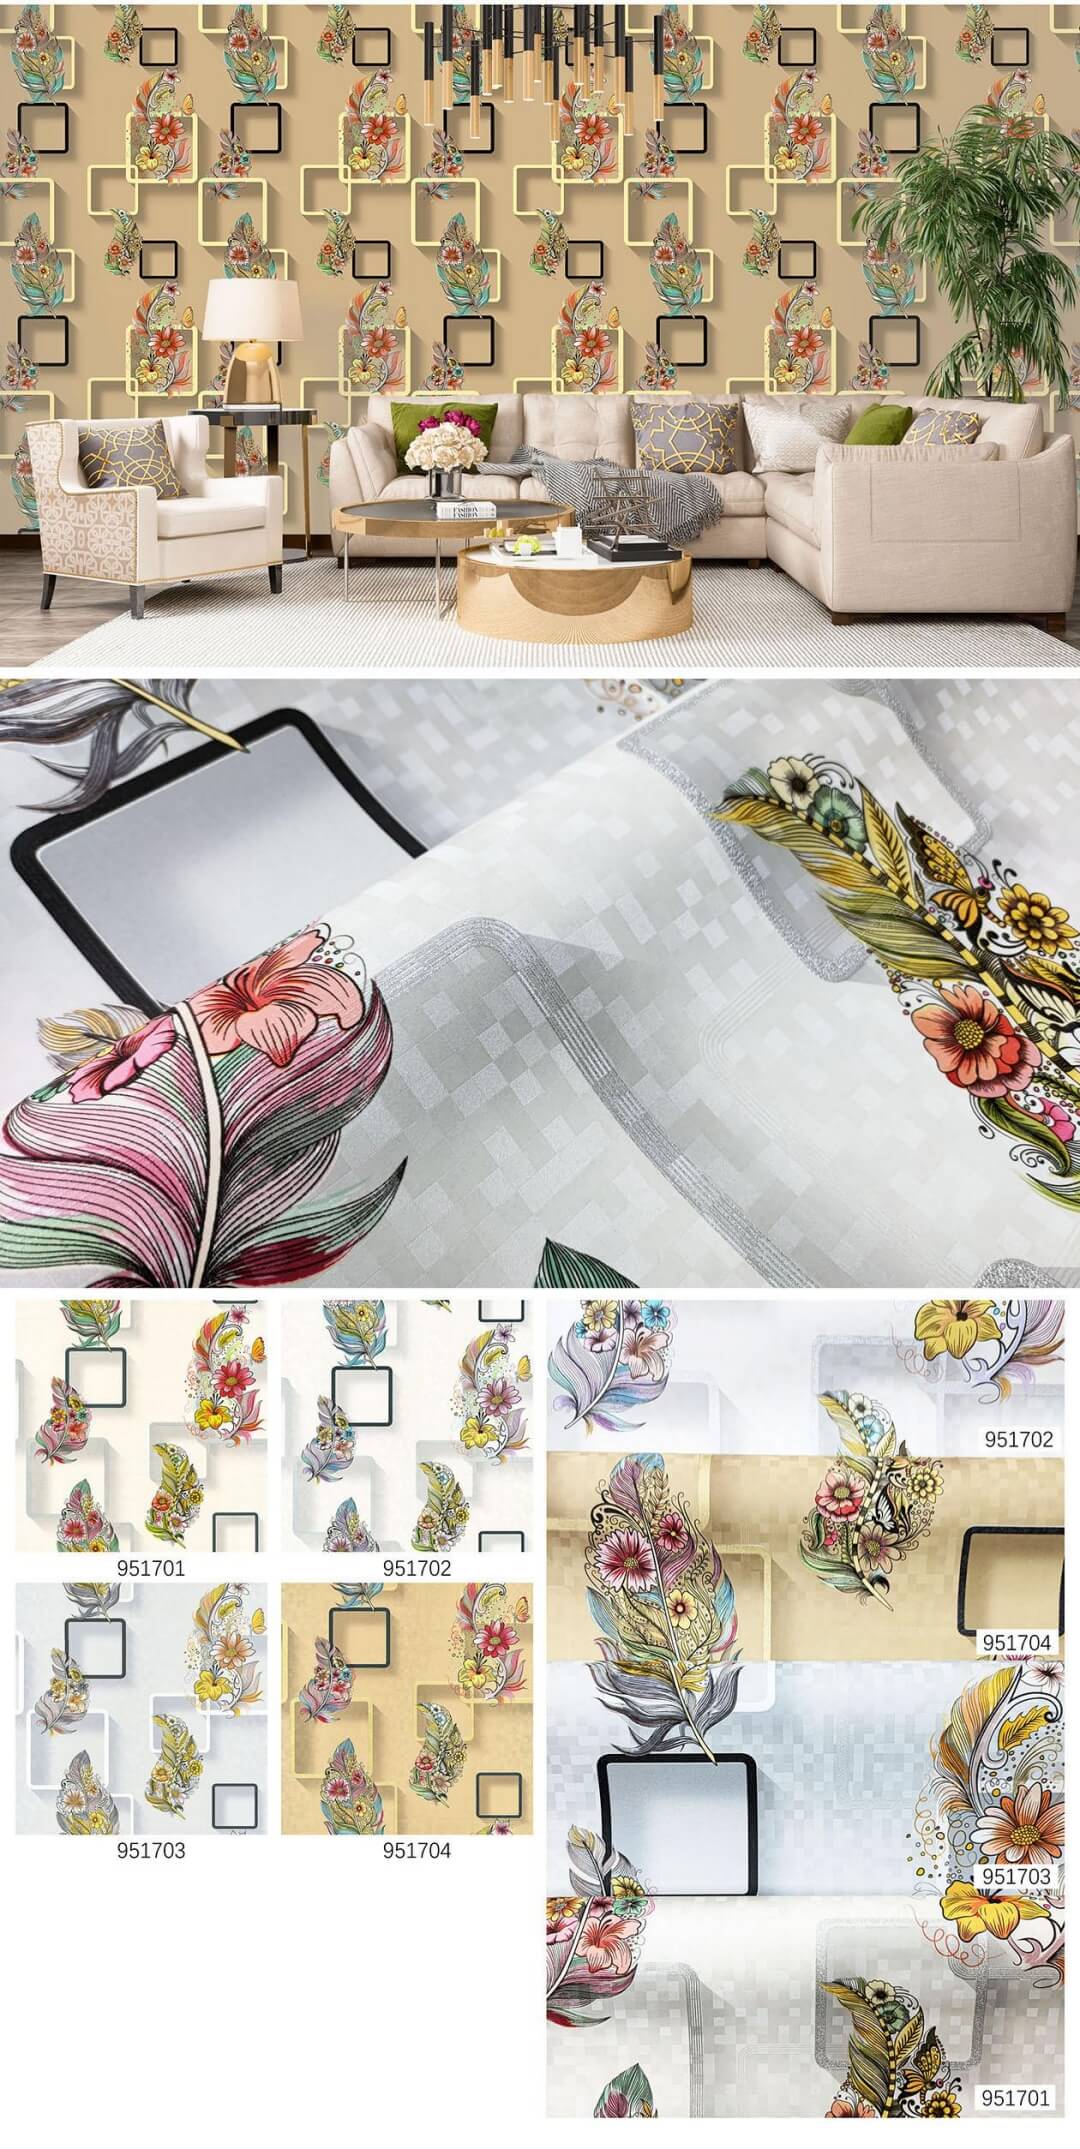 3D Wallpaper for home decoration (23)